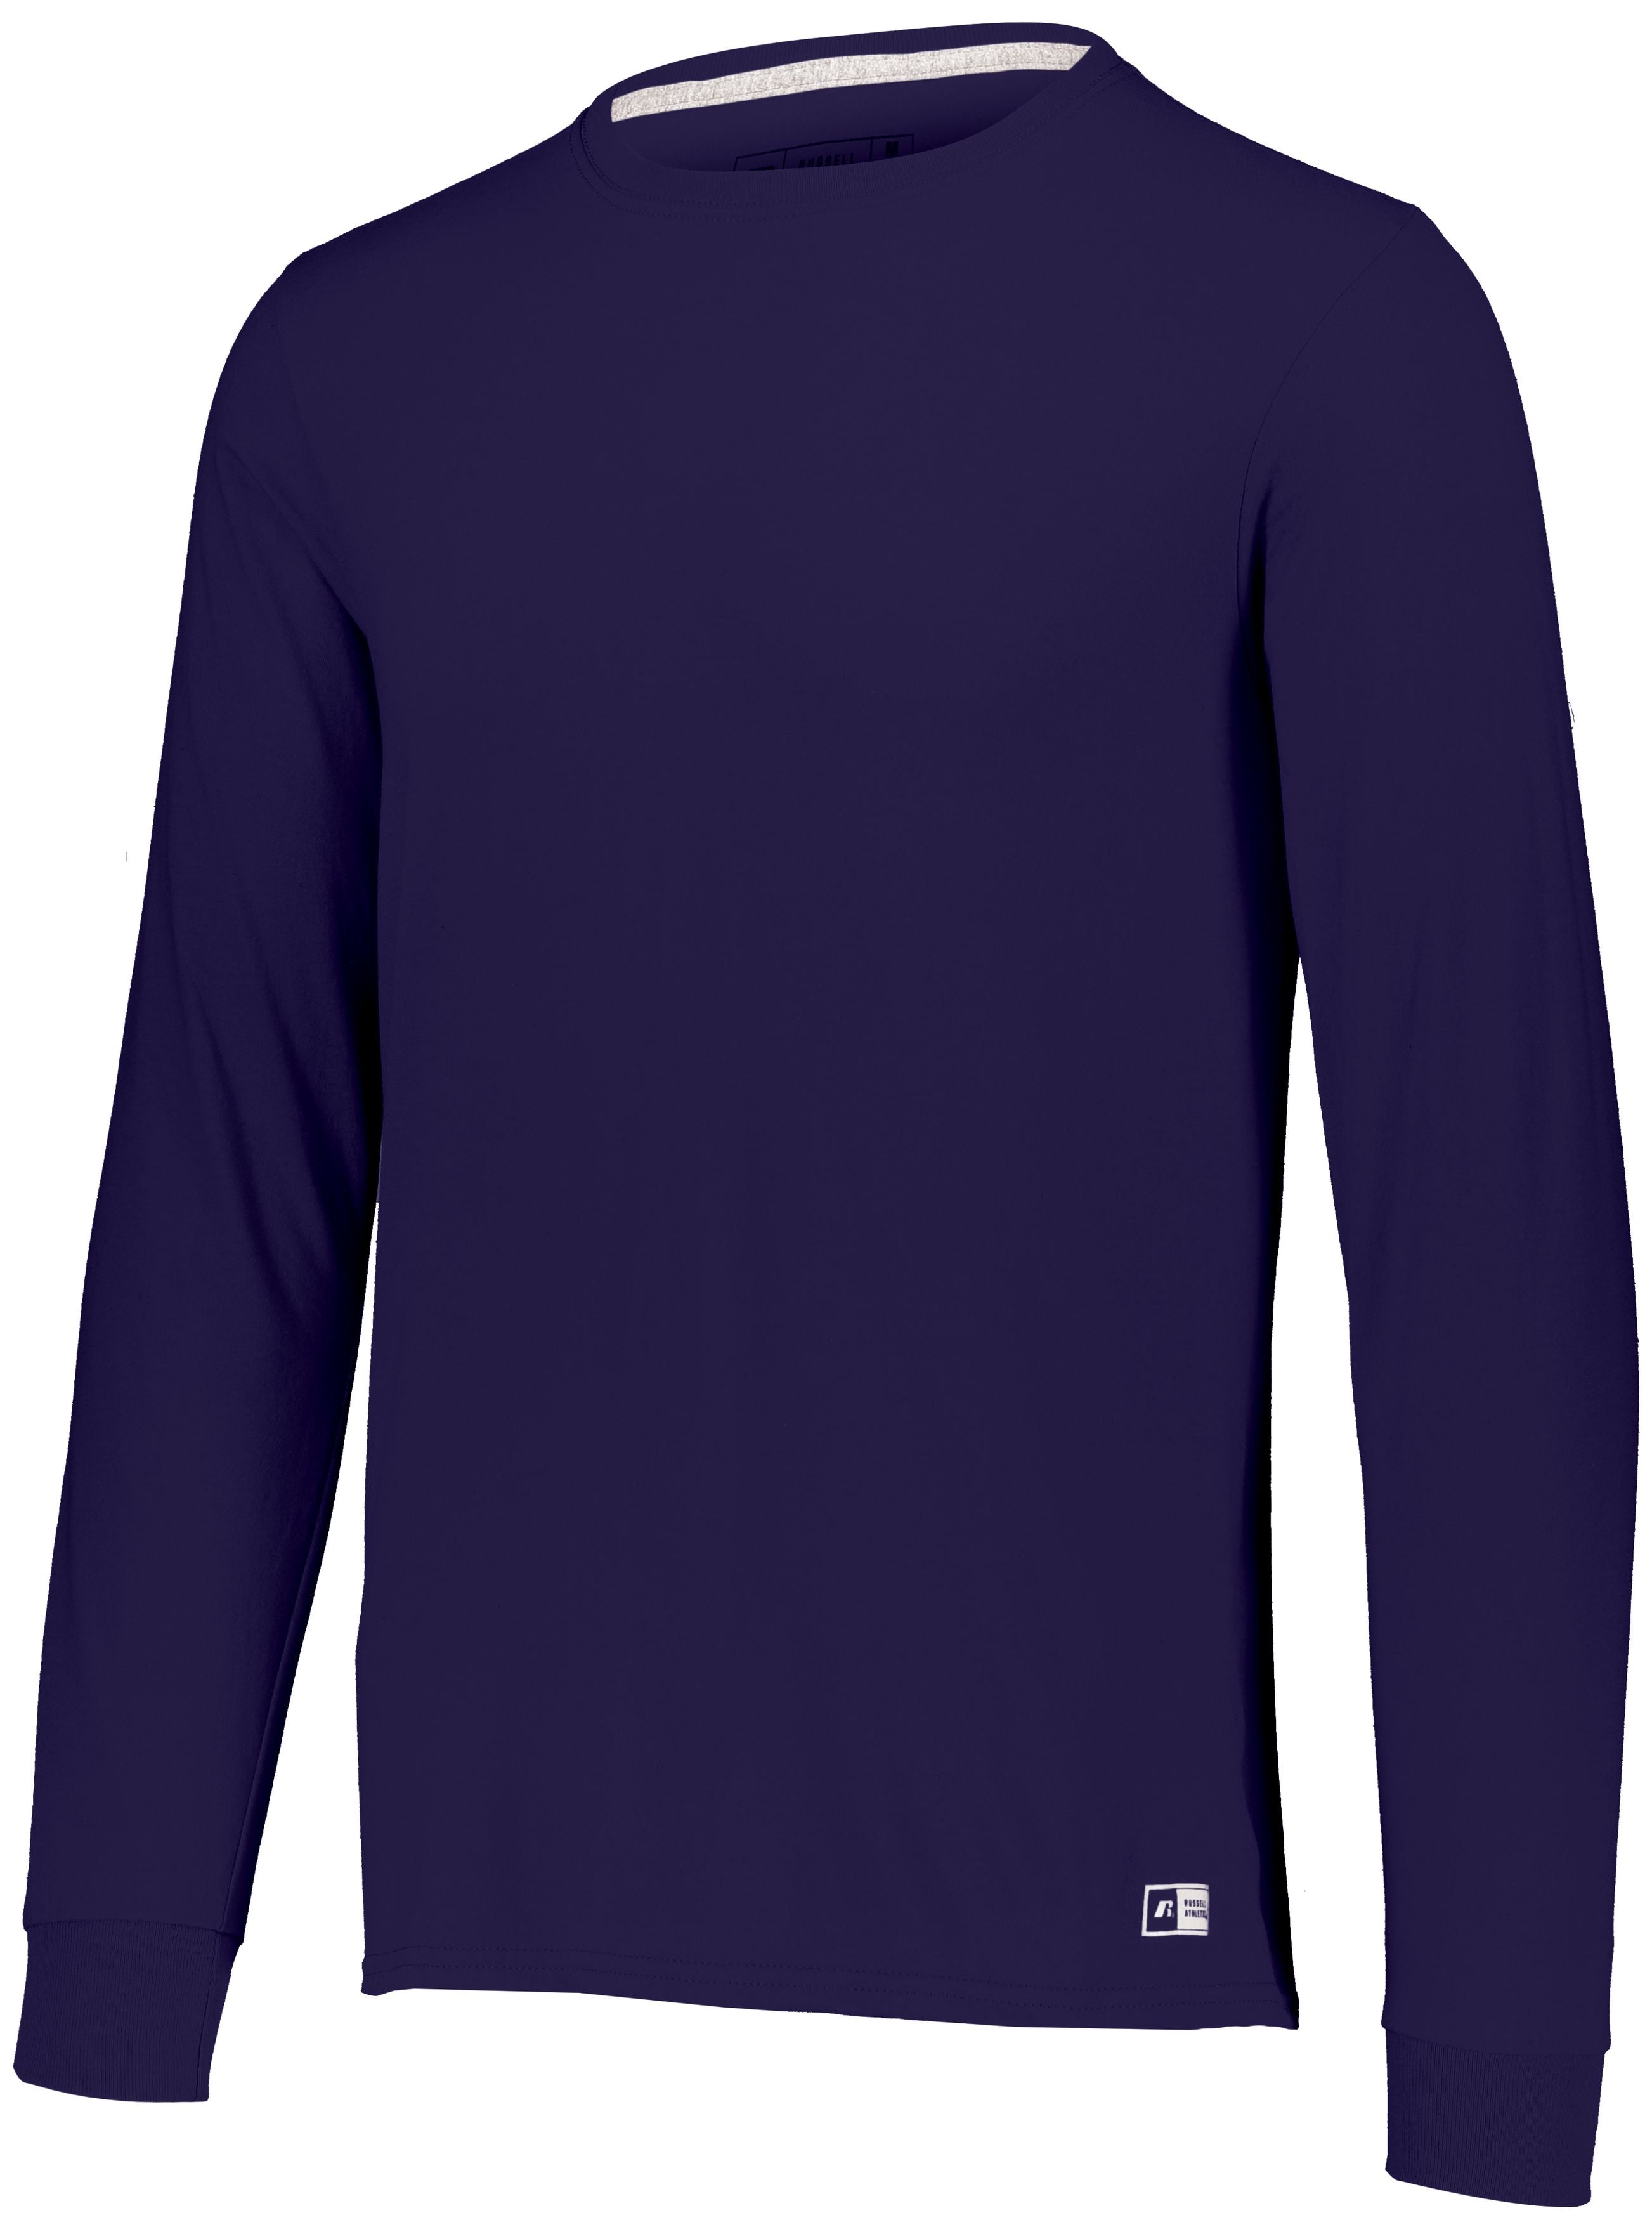 Russell Athletic Essential Long Sleeve Tee in Purple  -Part of the Adult, Adult-Tee-Shirt, T-Shirts, Russell-Athletic-Products, Shirts product lines at KanaleyCreations.com